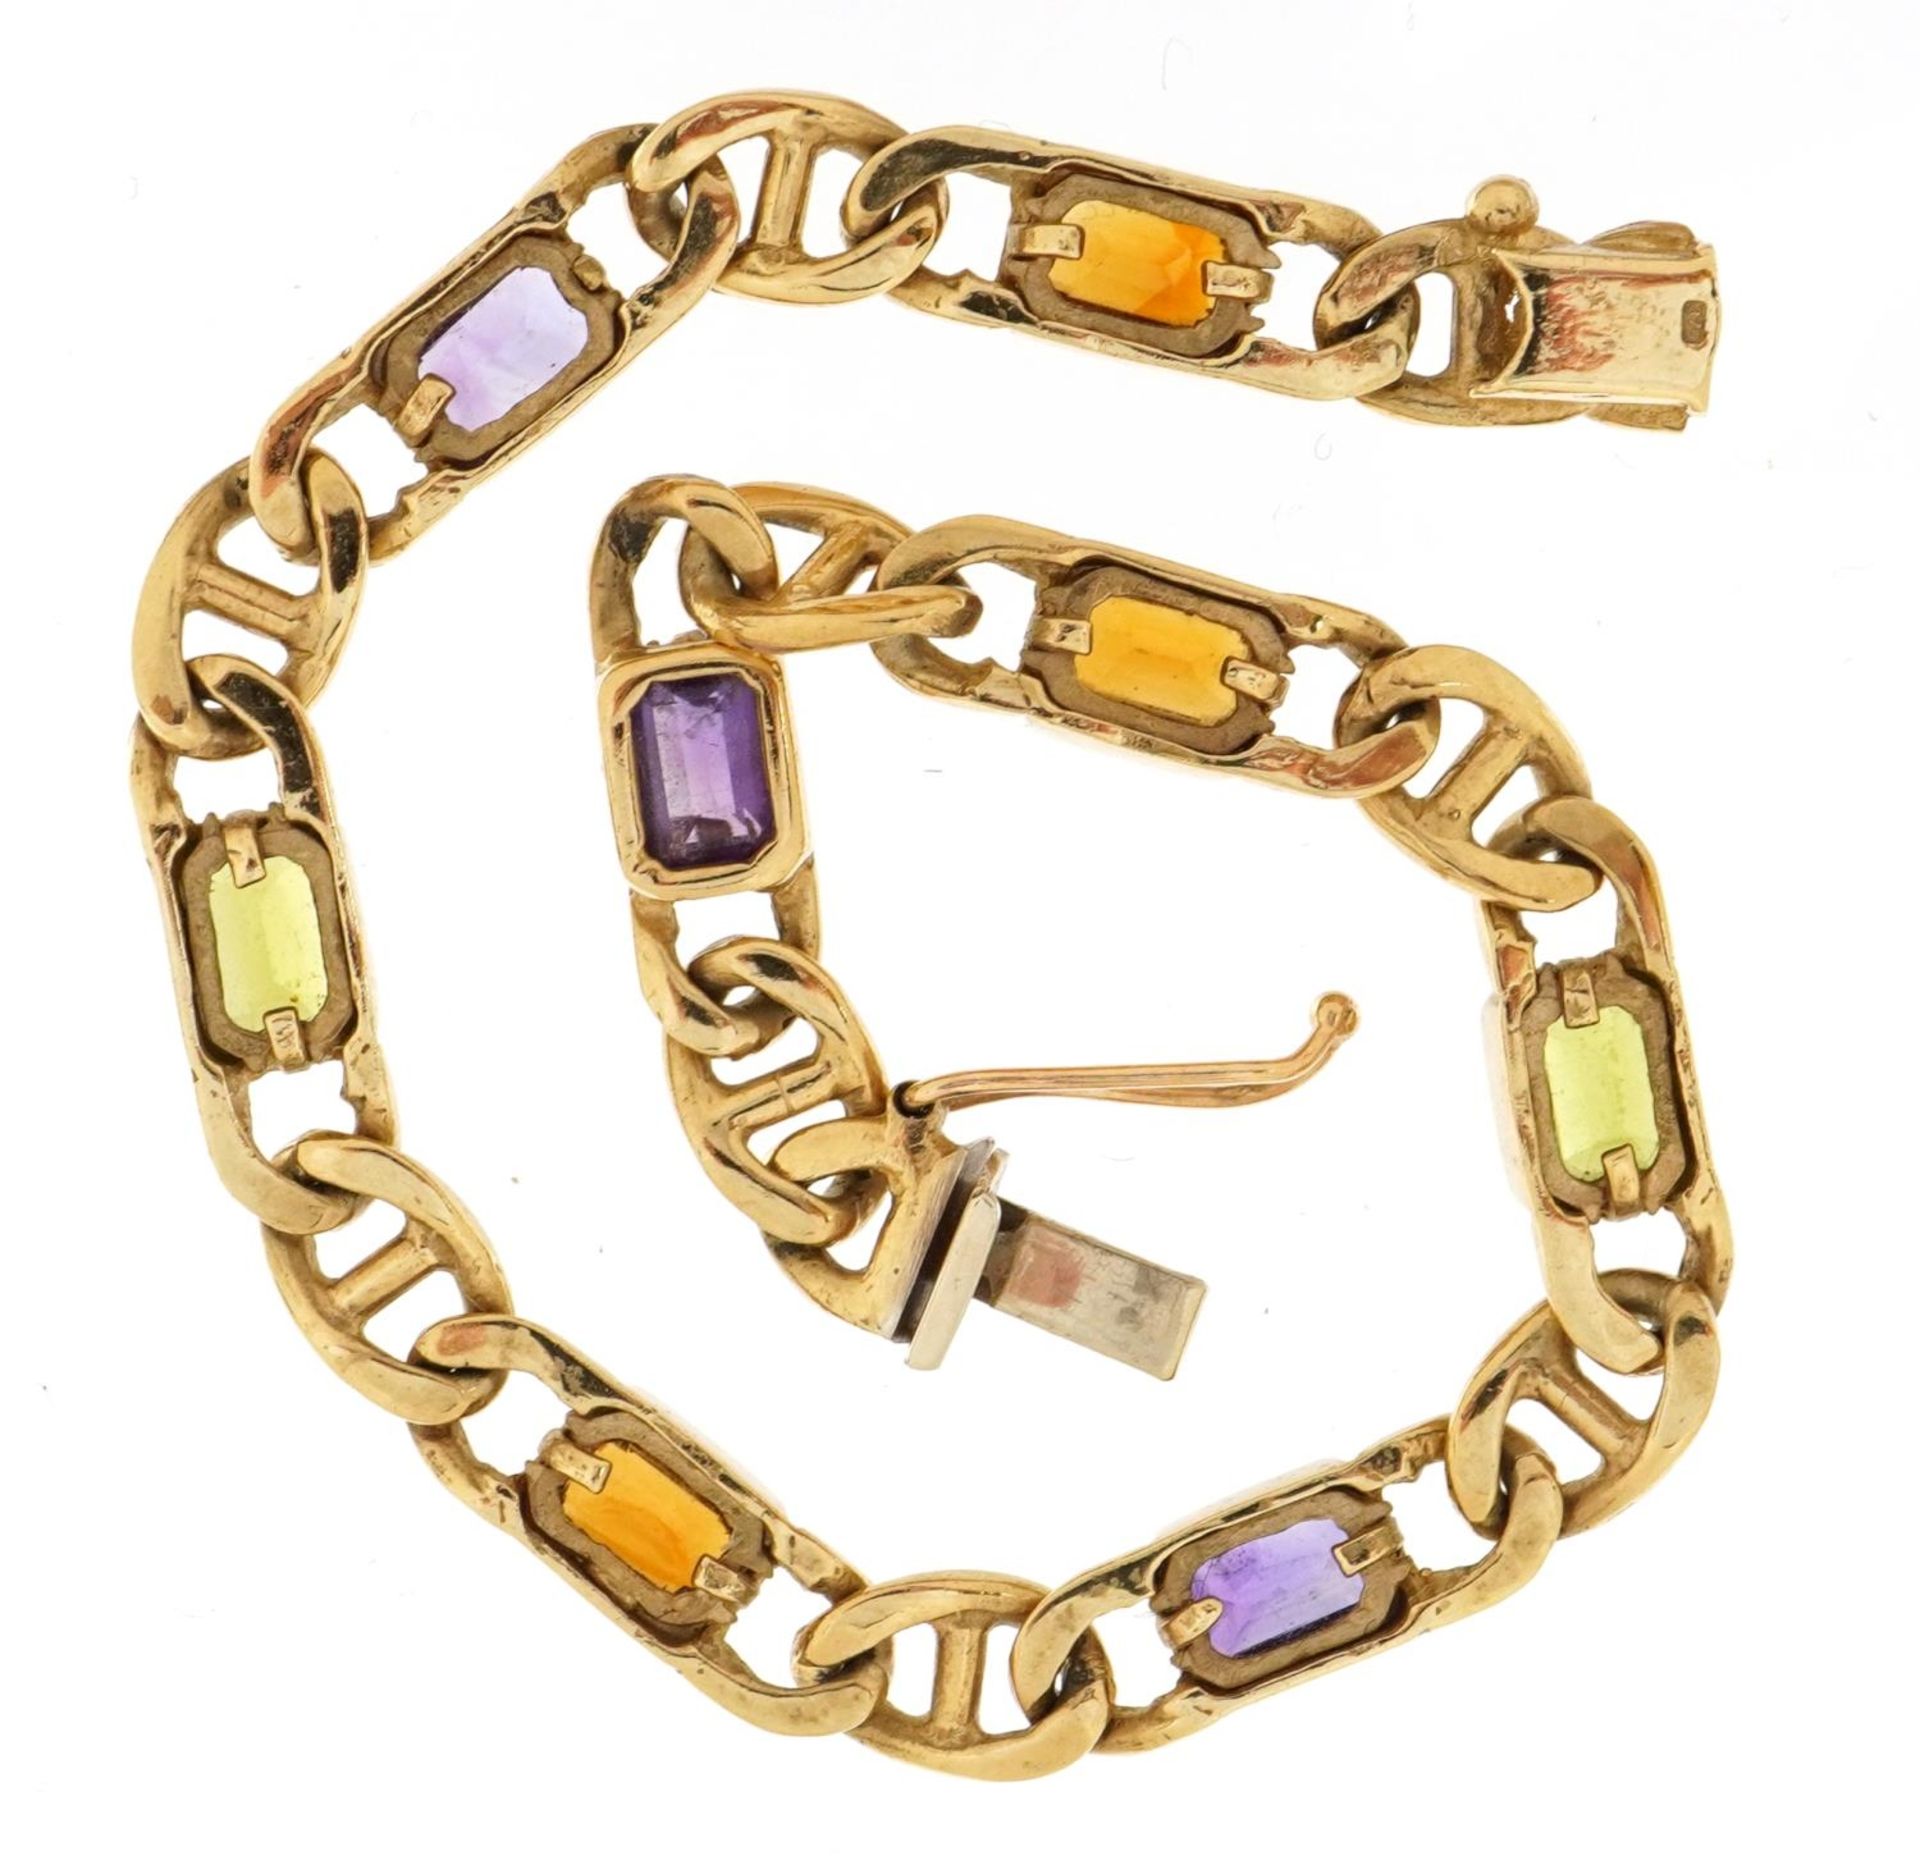 9ct gold curb link design bracelet set with purple, green and orange stones, 17.5cm in length, 12.4g - Image 3 of 4